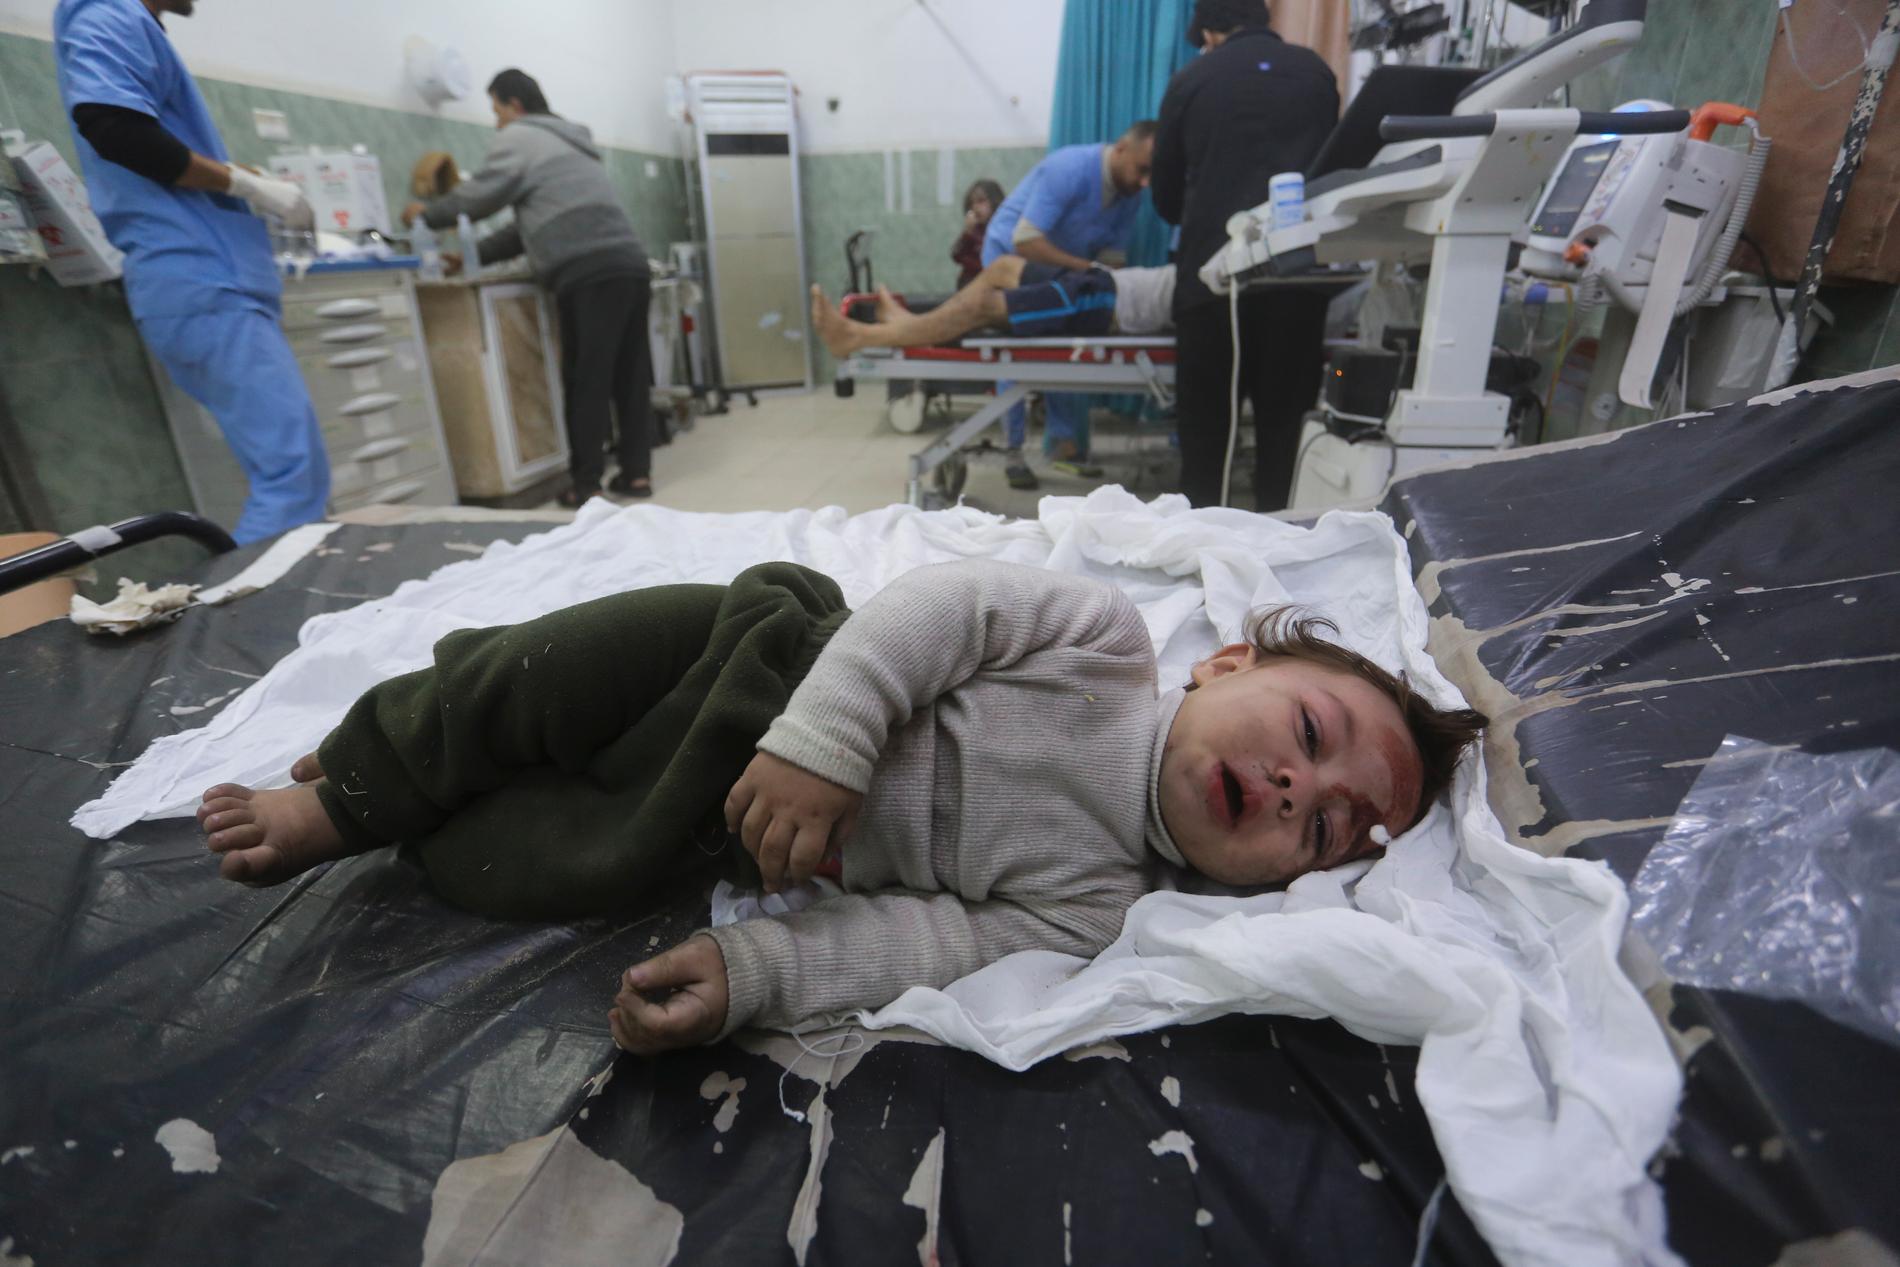 Wounded: A wounded Palestinian child was transferred to a hospital in Rafah on December 12.